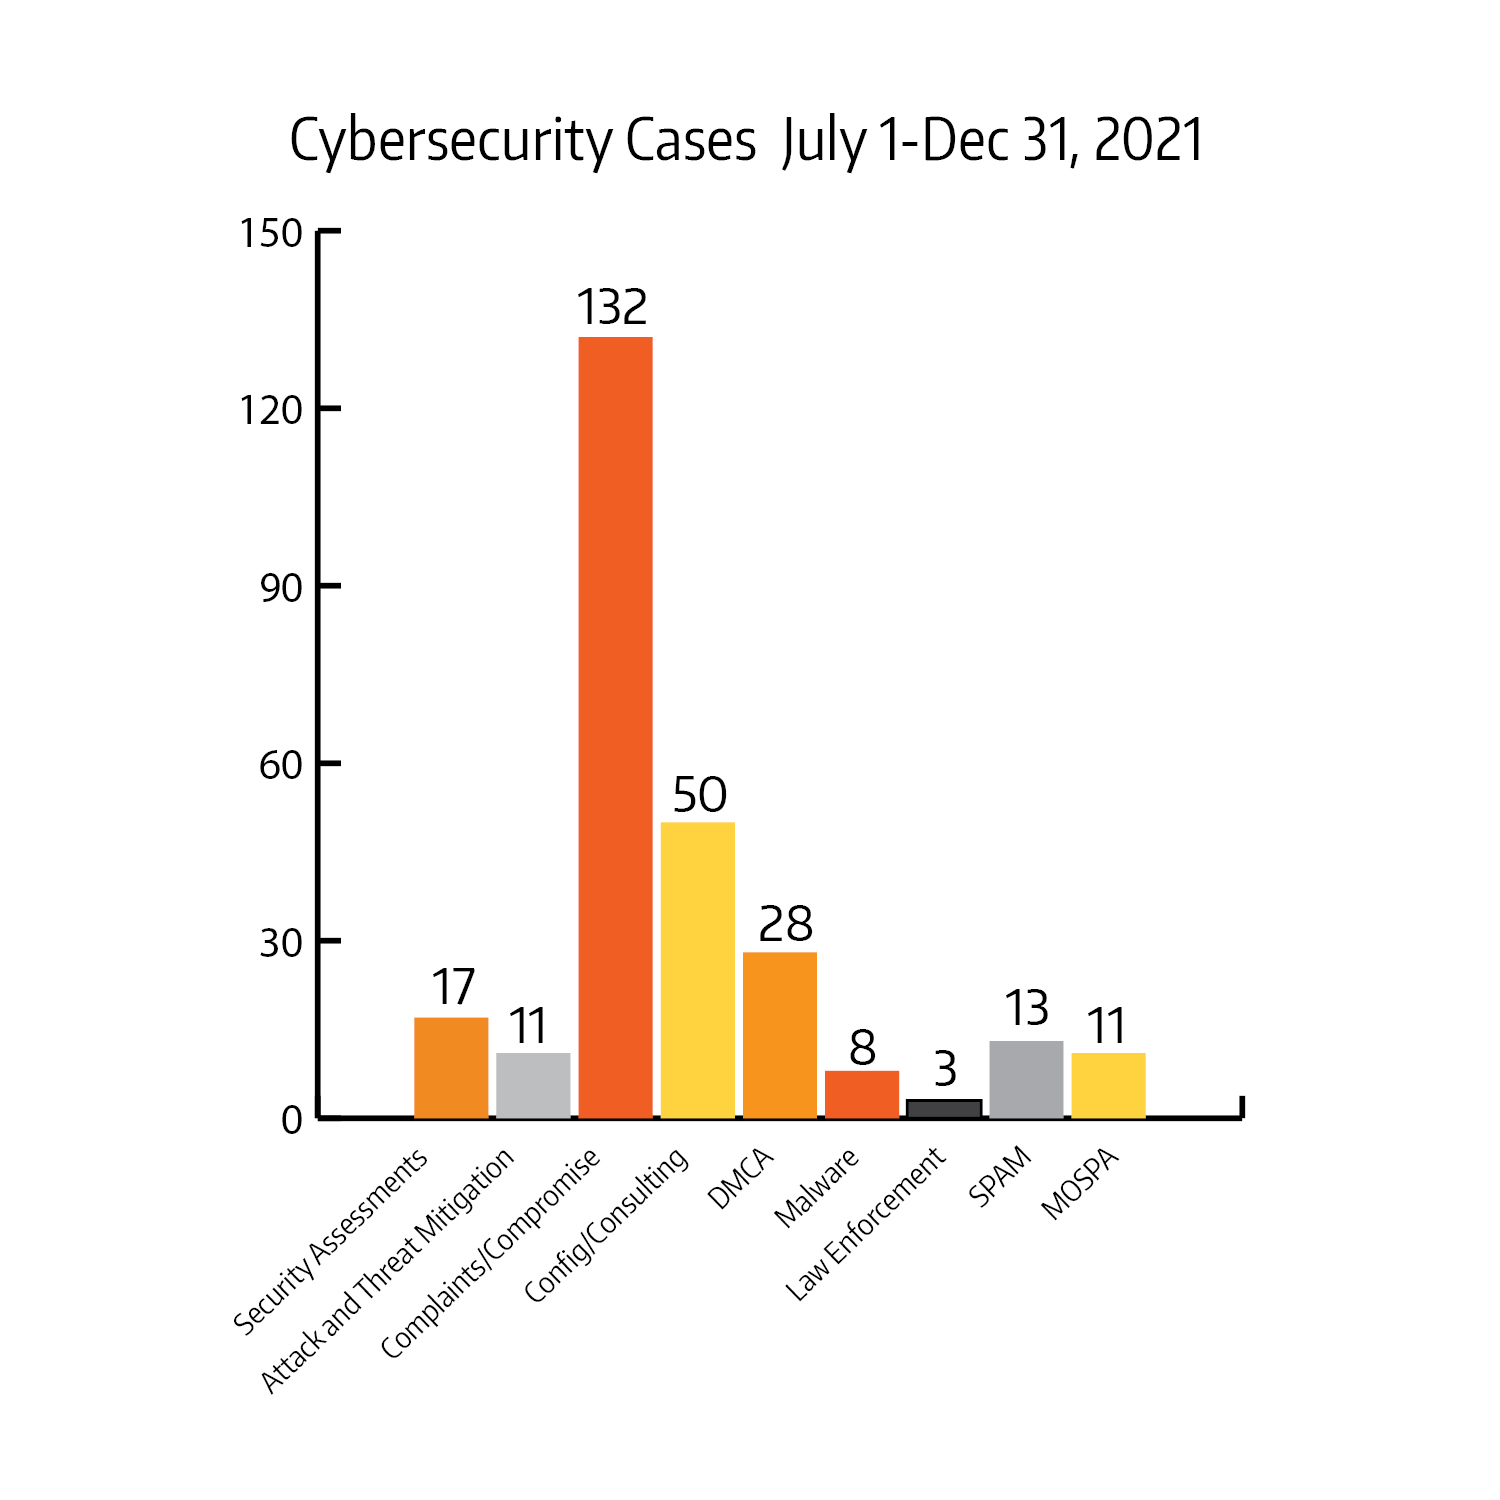 2021 Cybersecurity cases